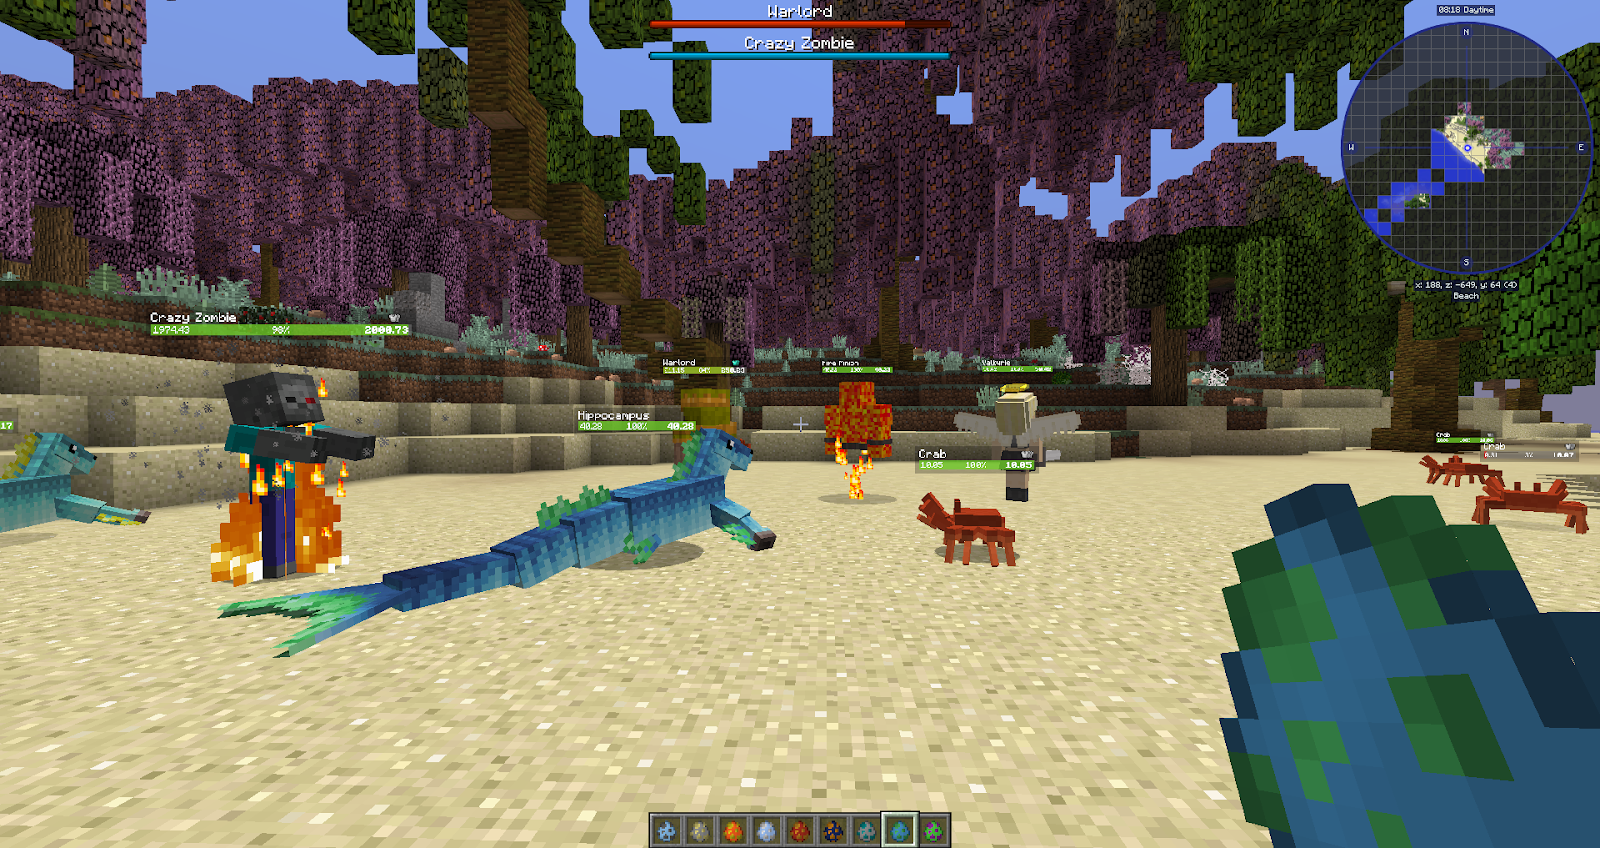 A screenshot from the modpack showing a handful of different creatures including crabs, sea monsters, a witch, and a zombie.